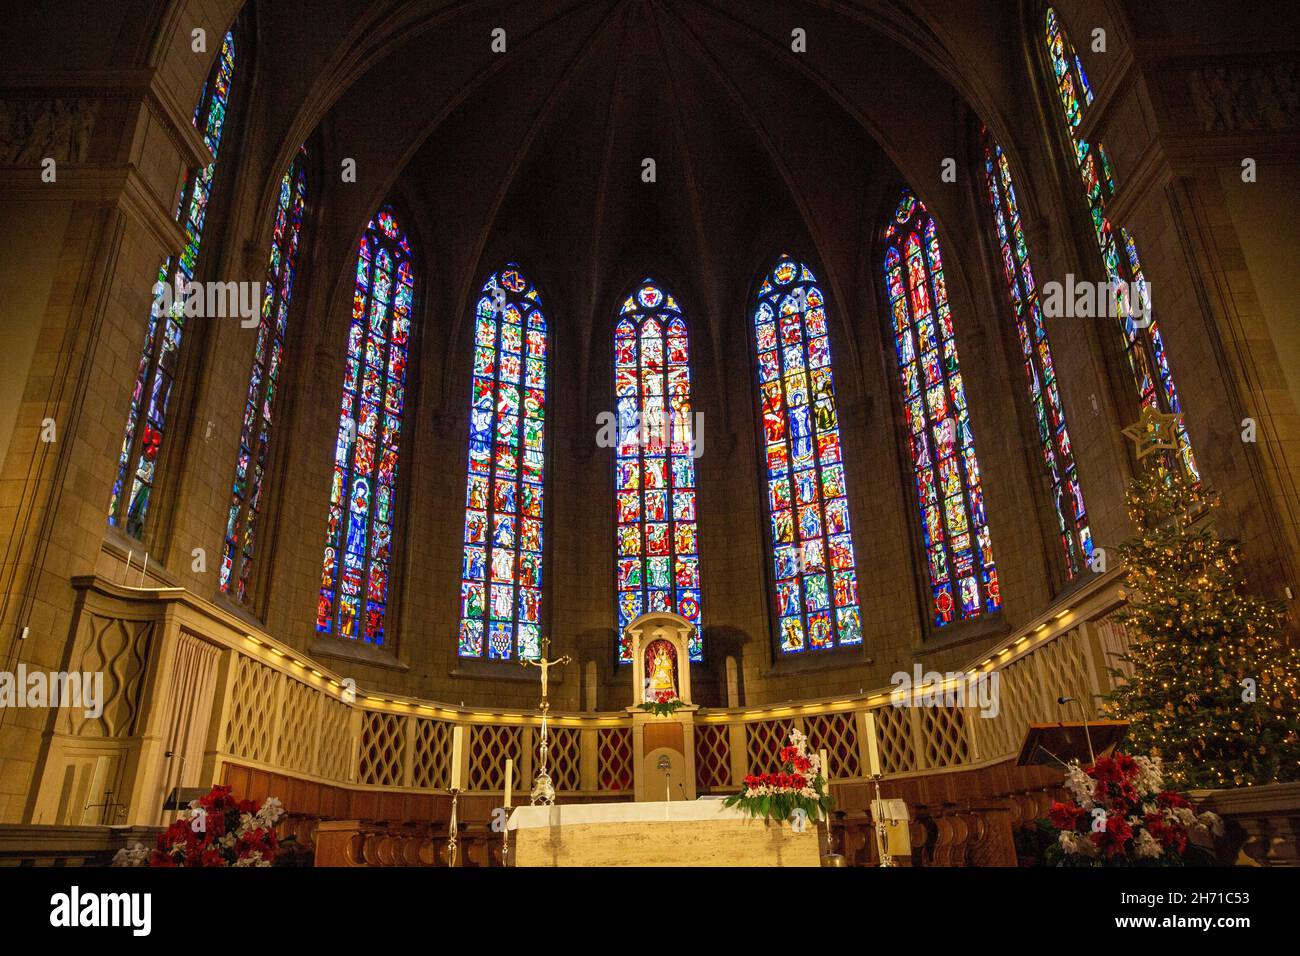 Stained Glass Windows in the Cathedral of Notre Dame. Luxembourg City, Luxembourg. Stock Photo